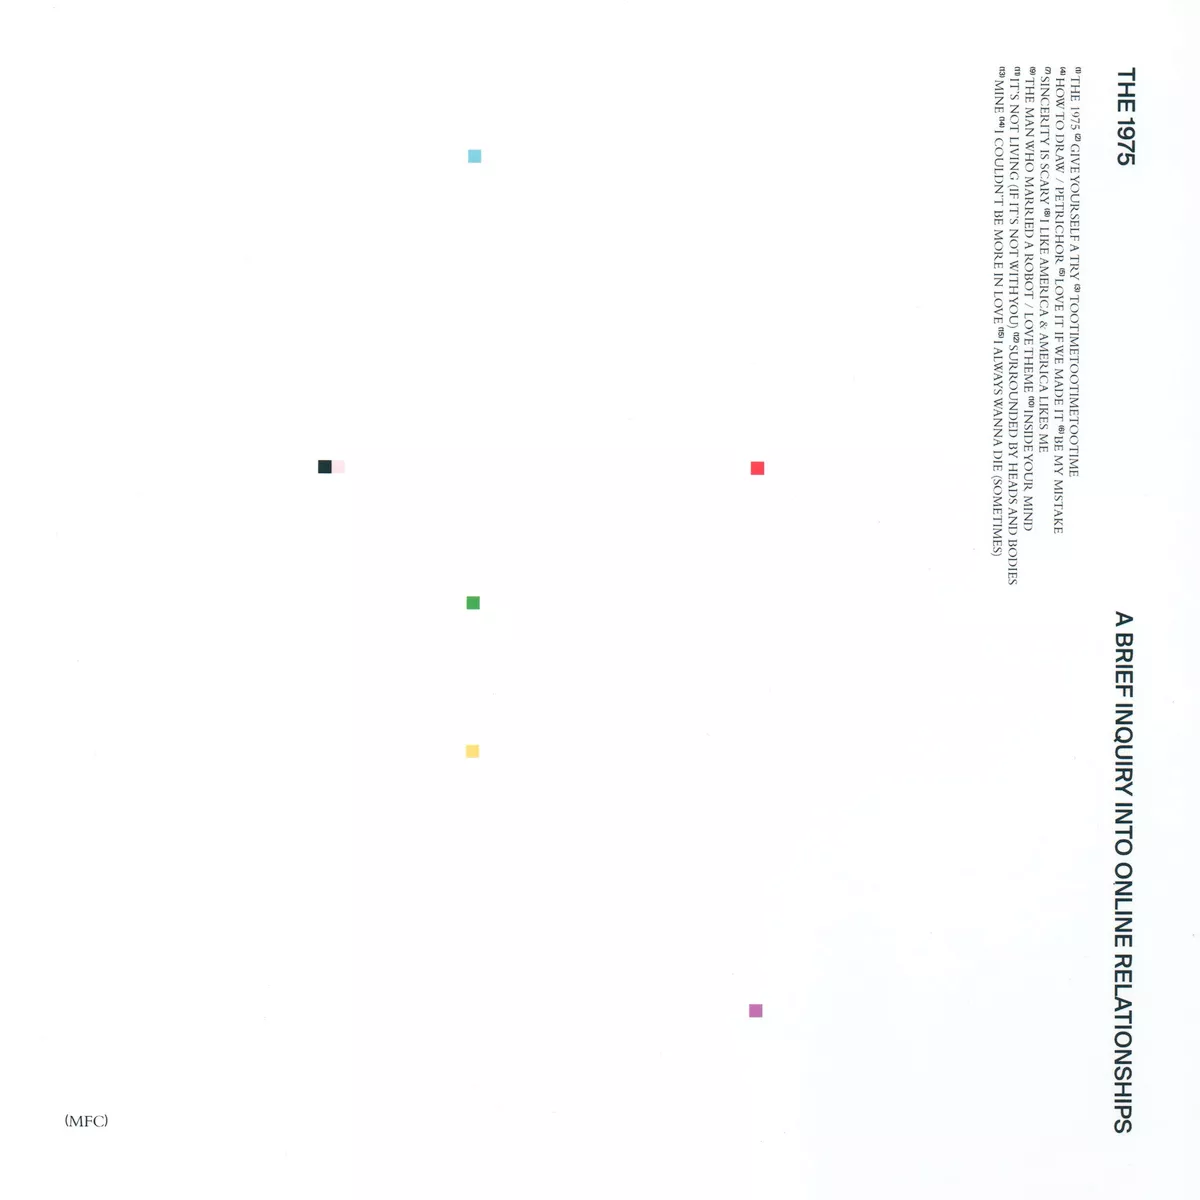 A Brief Inquiry into Online Relationships - The 1975